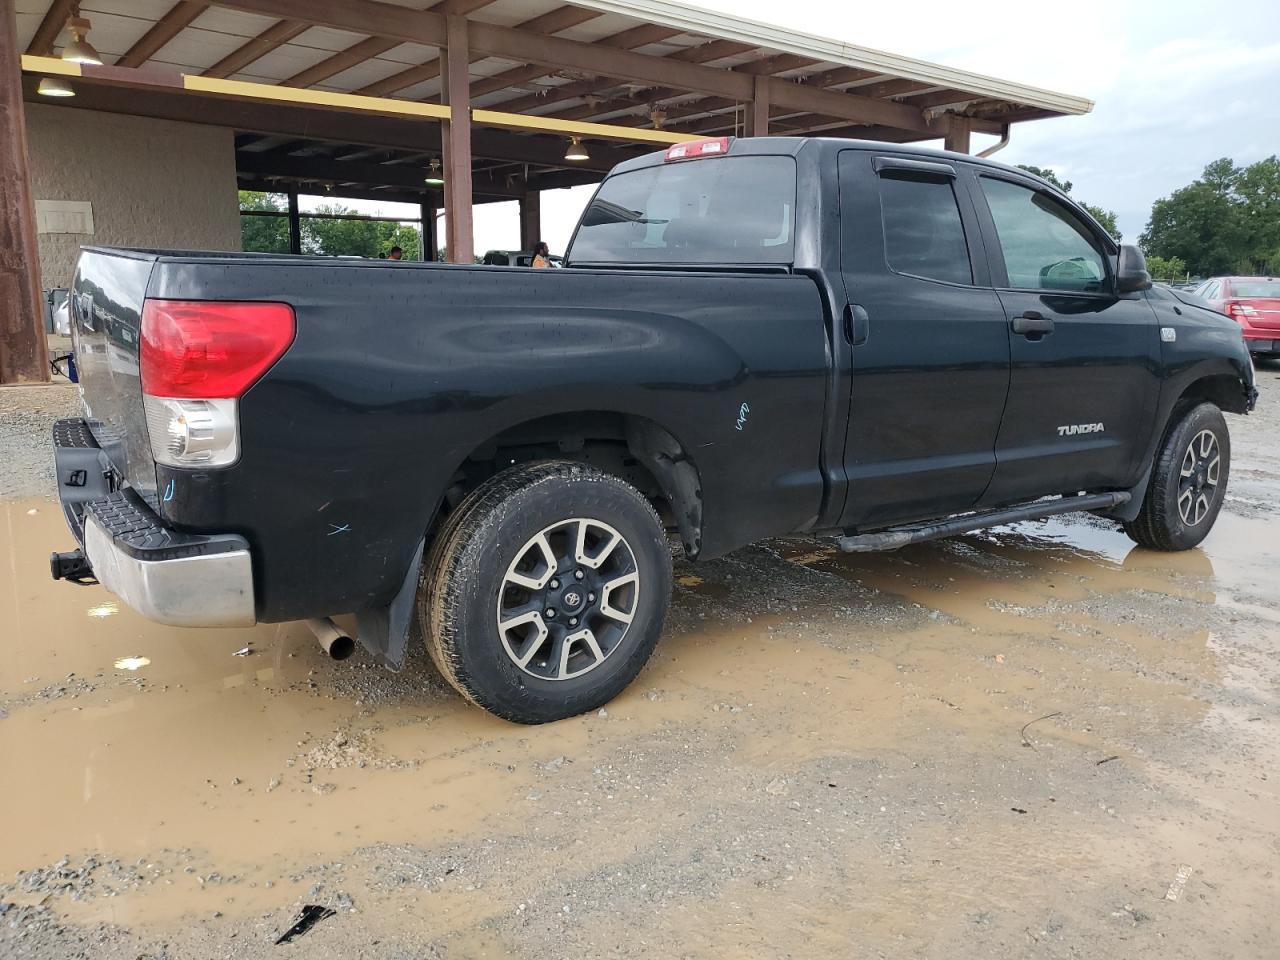 5TFRT54188X****** Salvage and Repairable 2008 Toyota Tundra in AL - Tanner